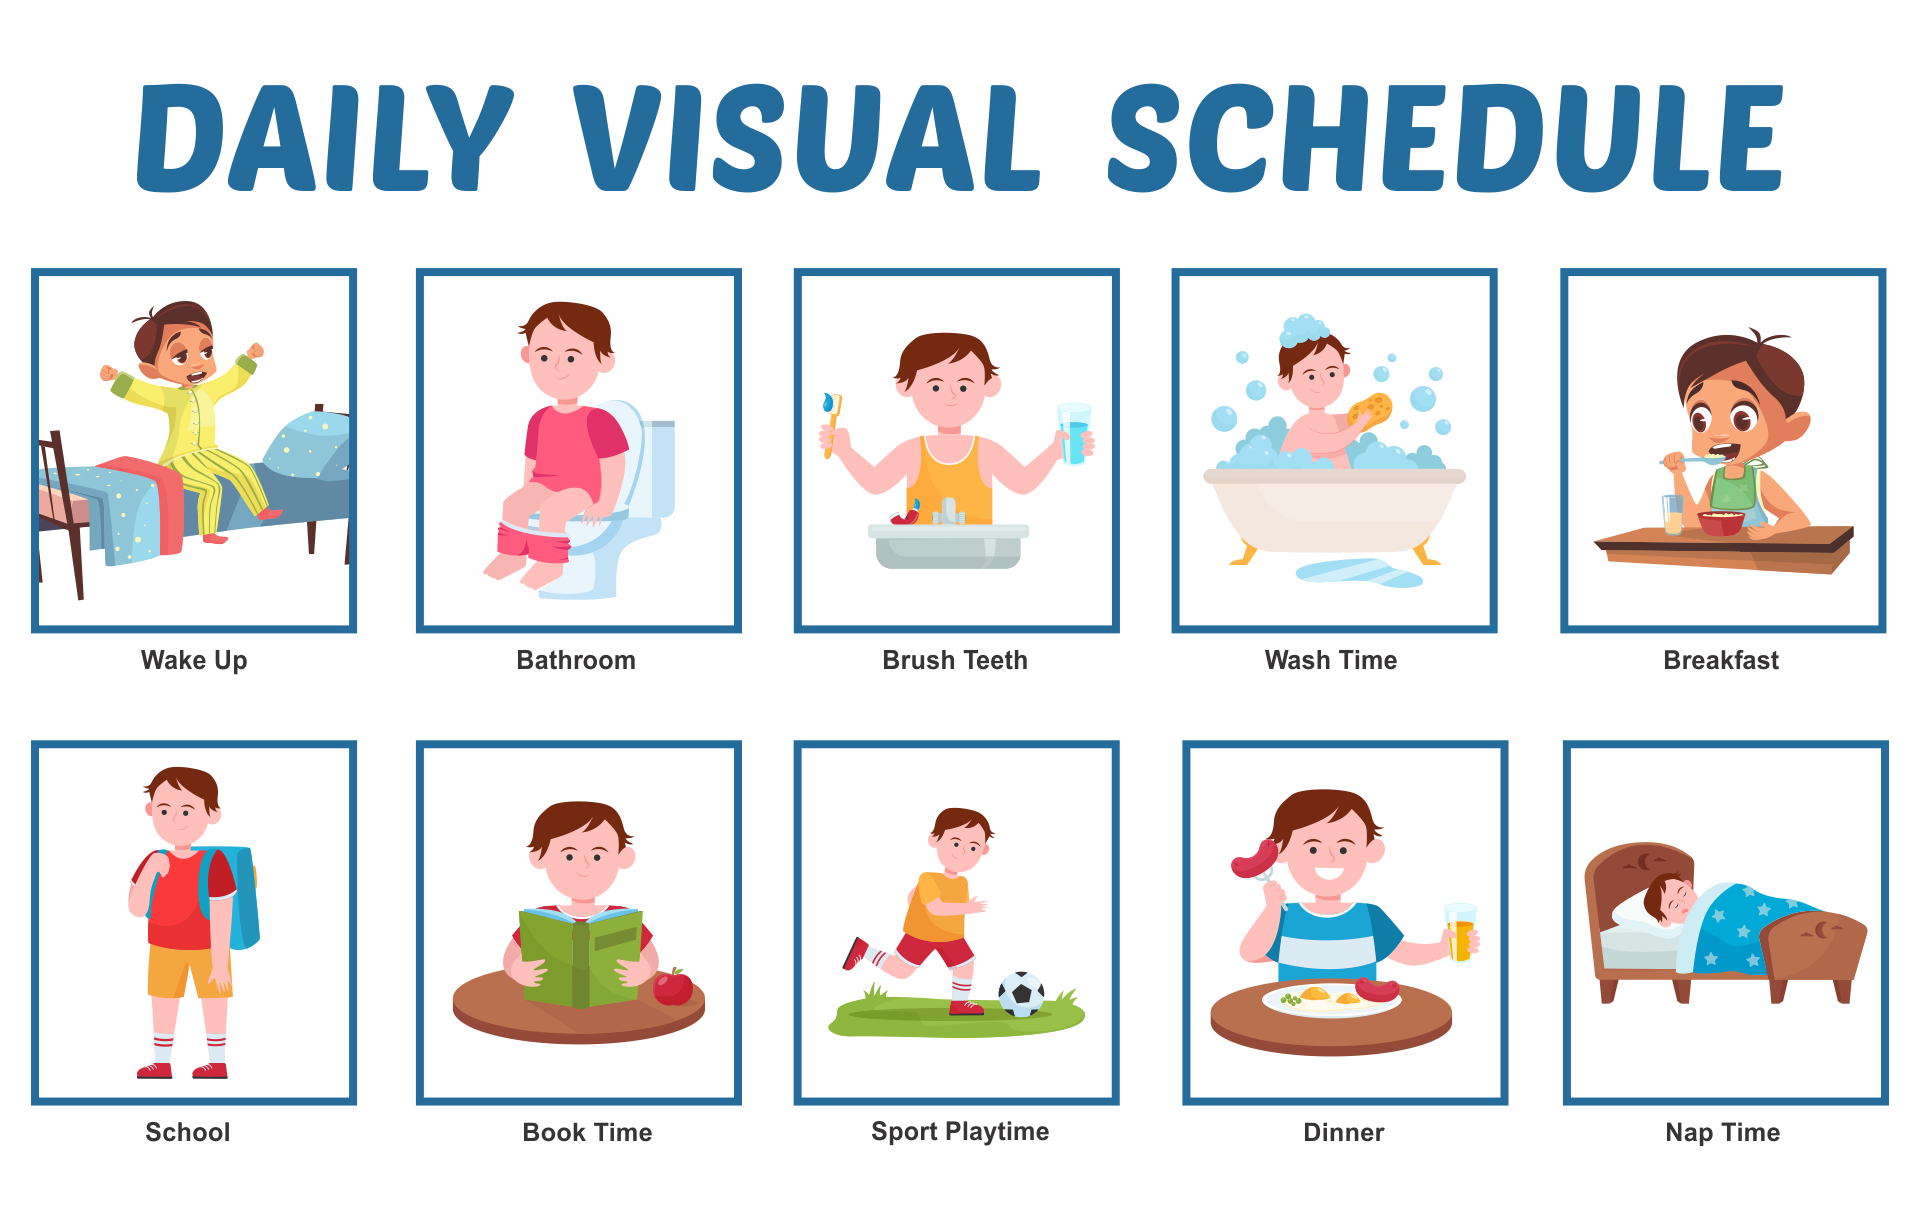 visual schedule daily cliparts hd free arrives